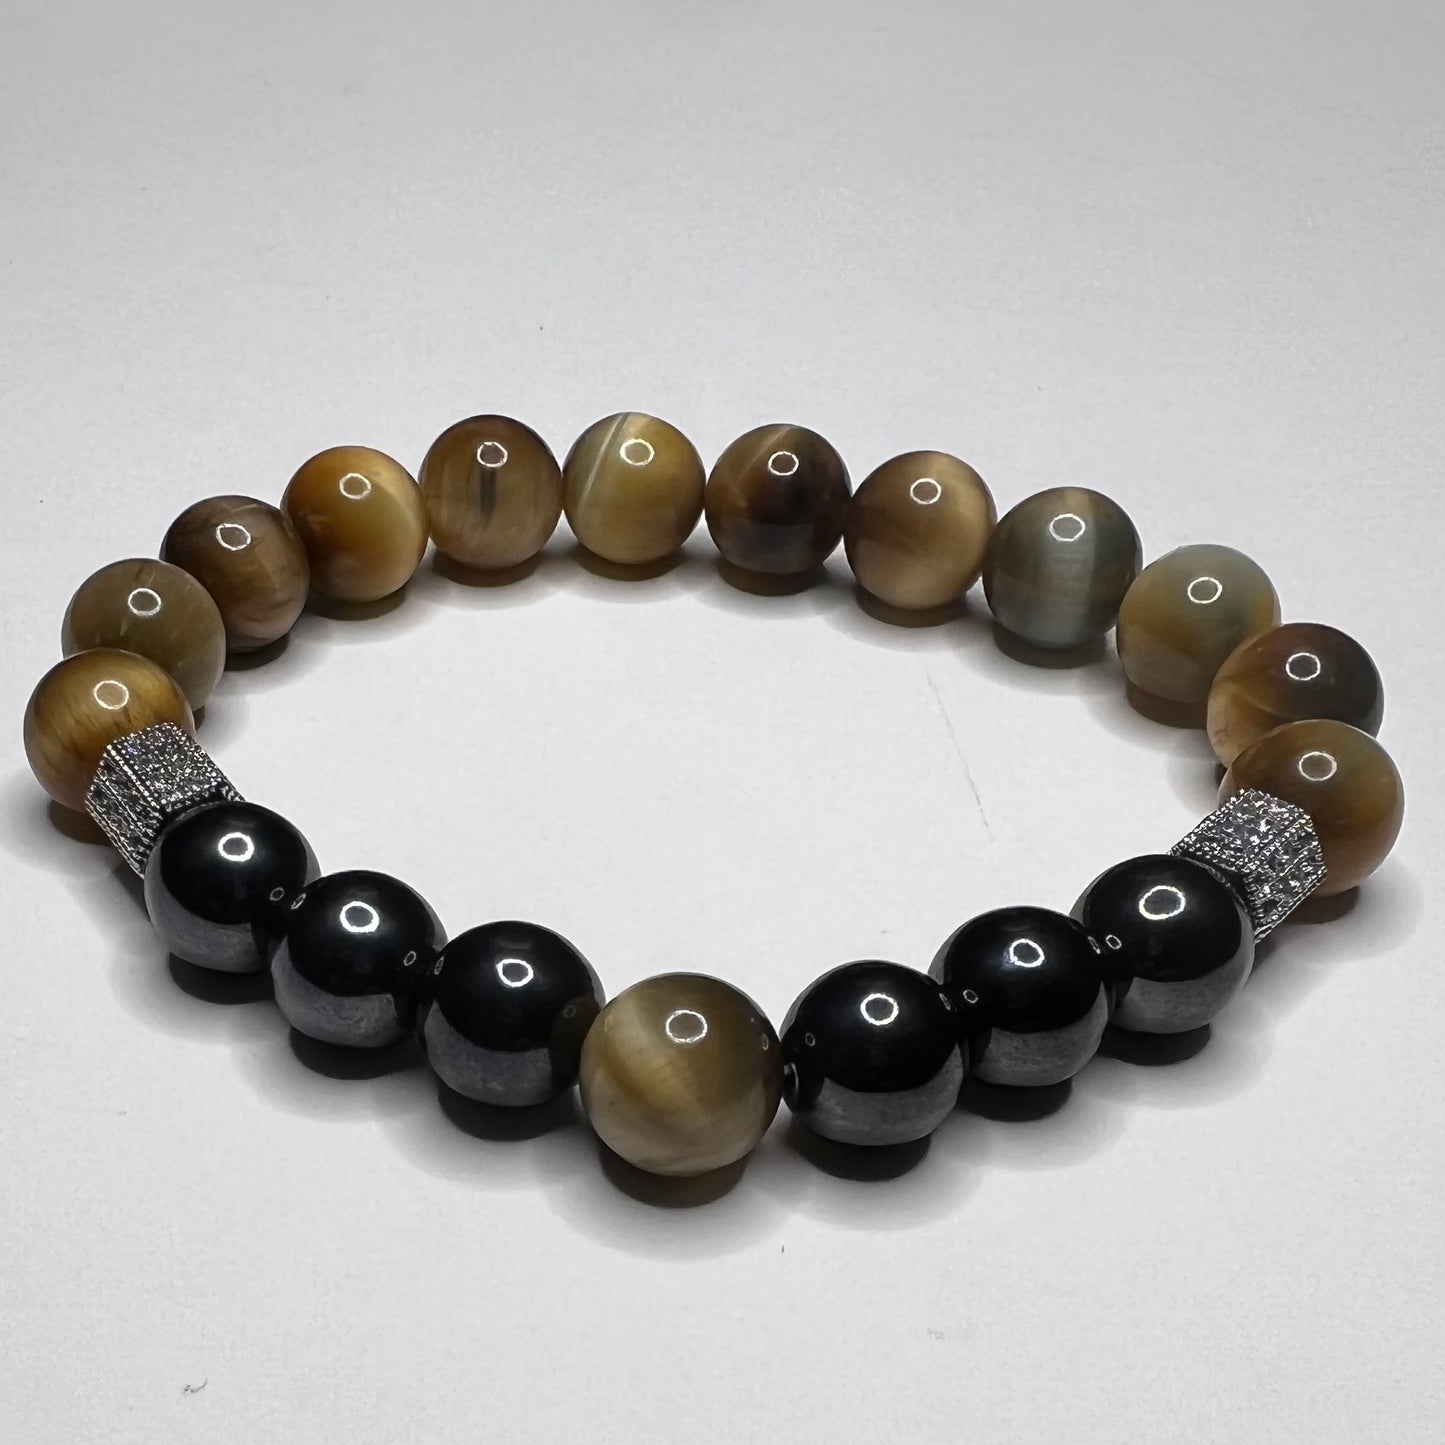 Tiger Eye-(promotes vitality and physical action ) Hematite—(restores, strengthens and regulates blood supply. Great for anxiety) bracelet